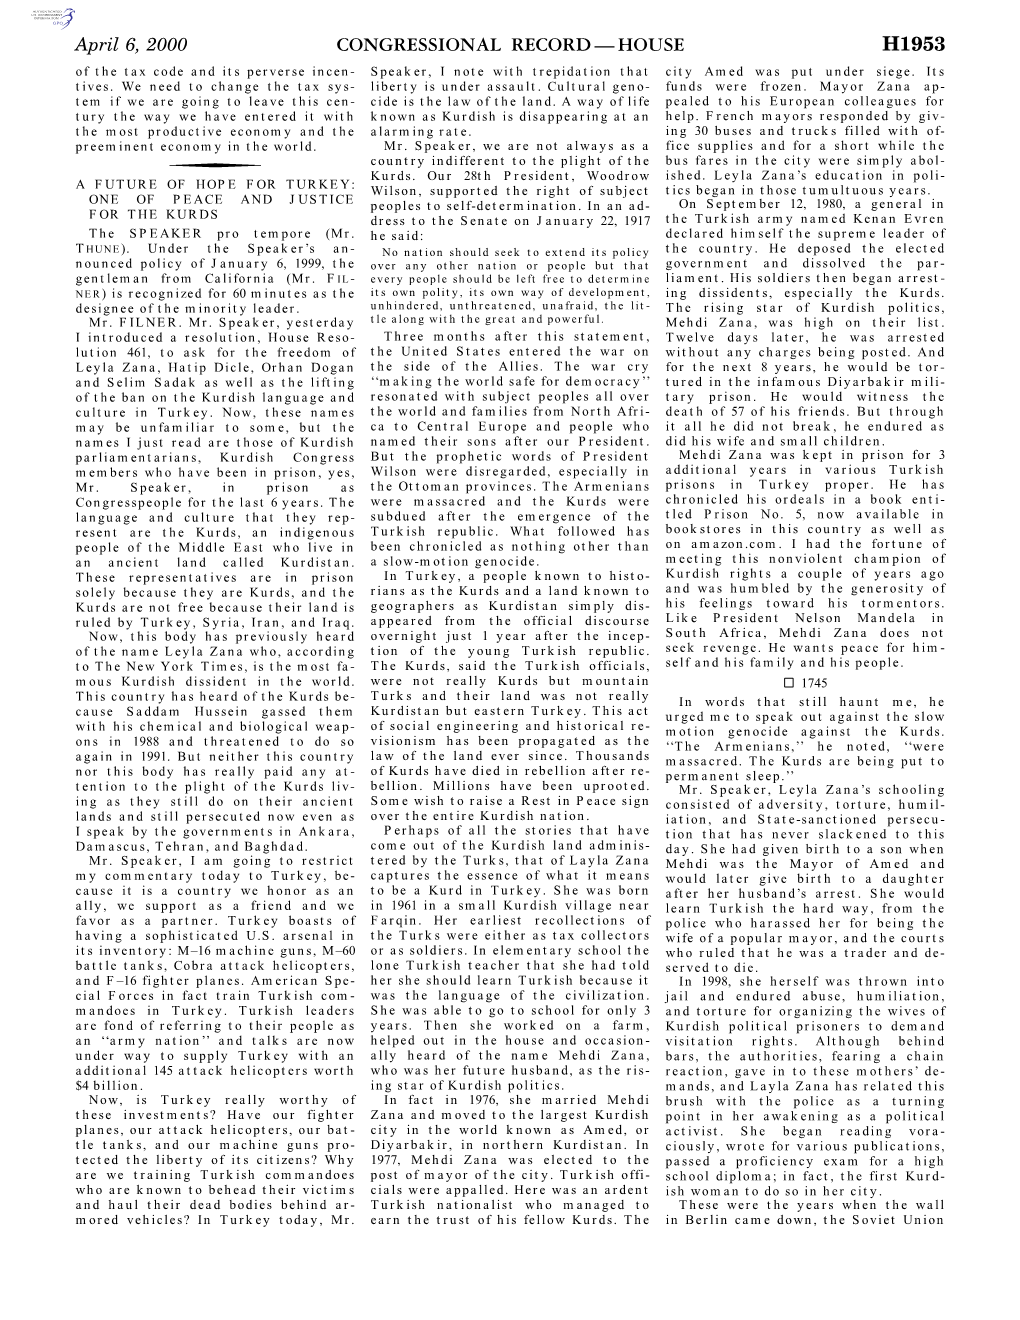 Congressional Record—House H1953